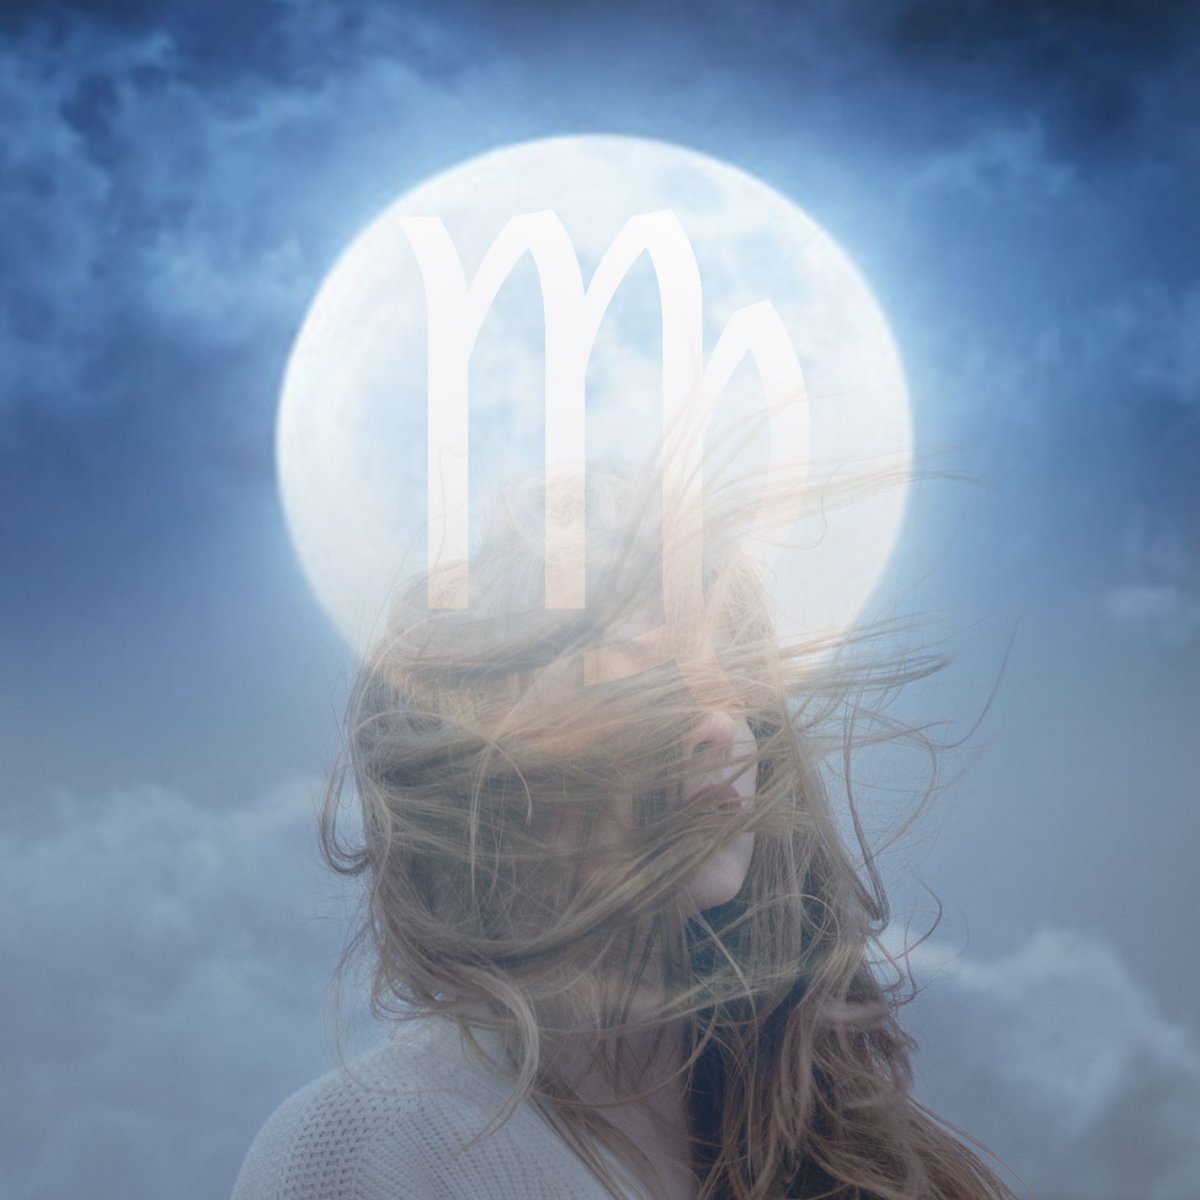 Welcome to the Full moon in Virgo 